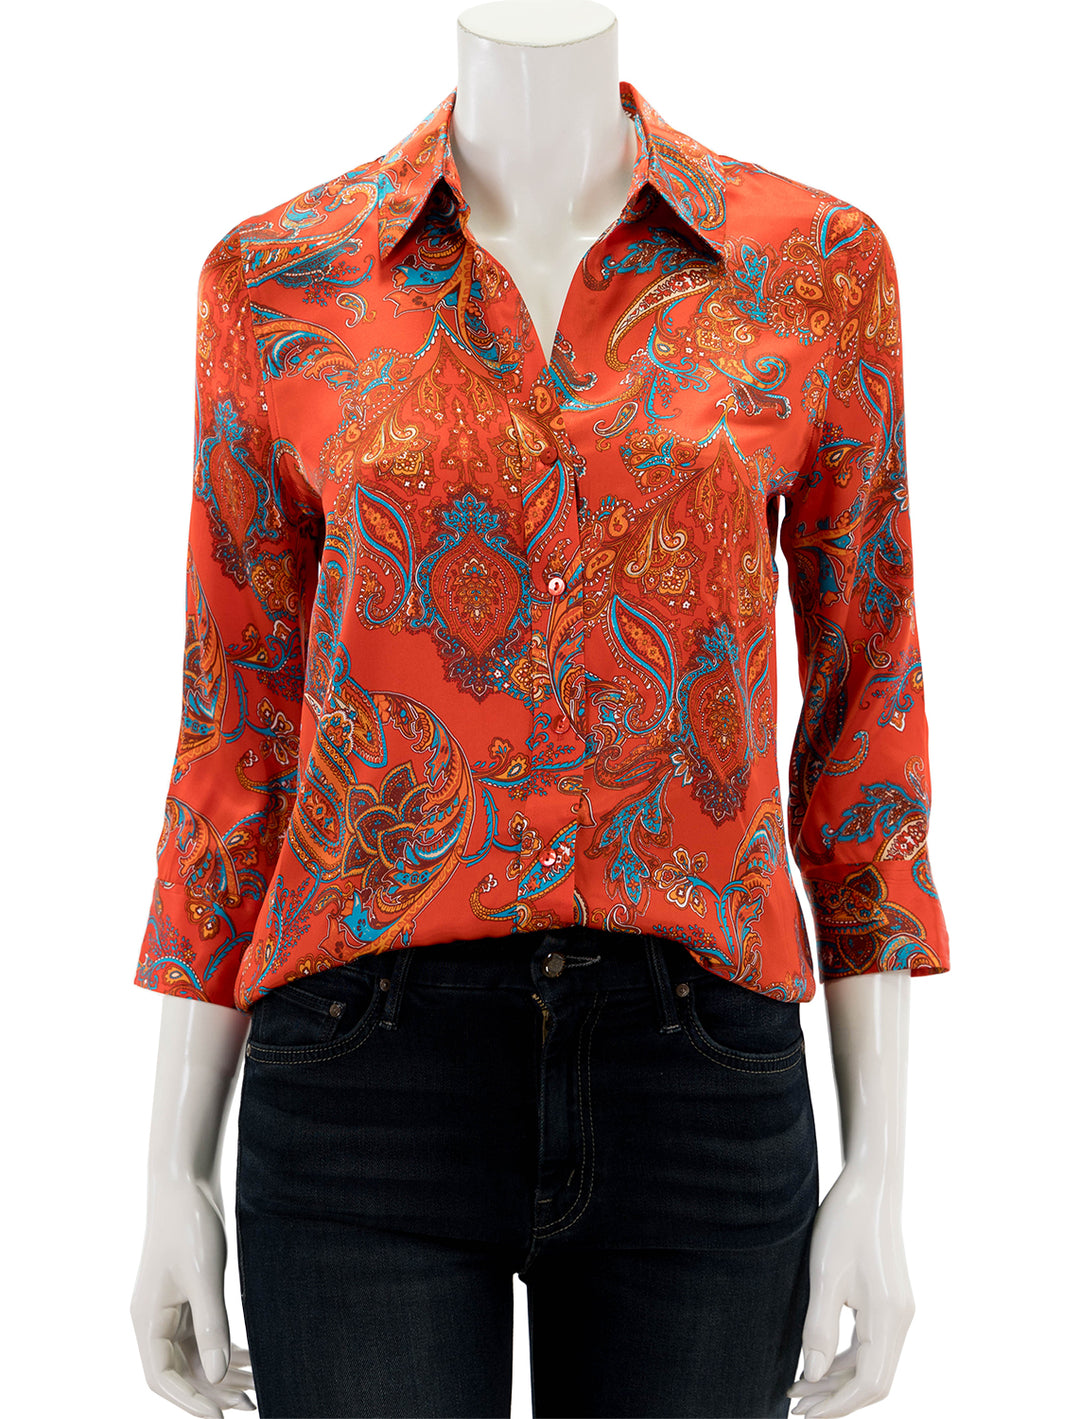 Front view of L'agence's dani shirt in fire red paisley.